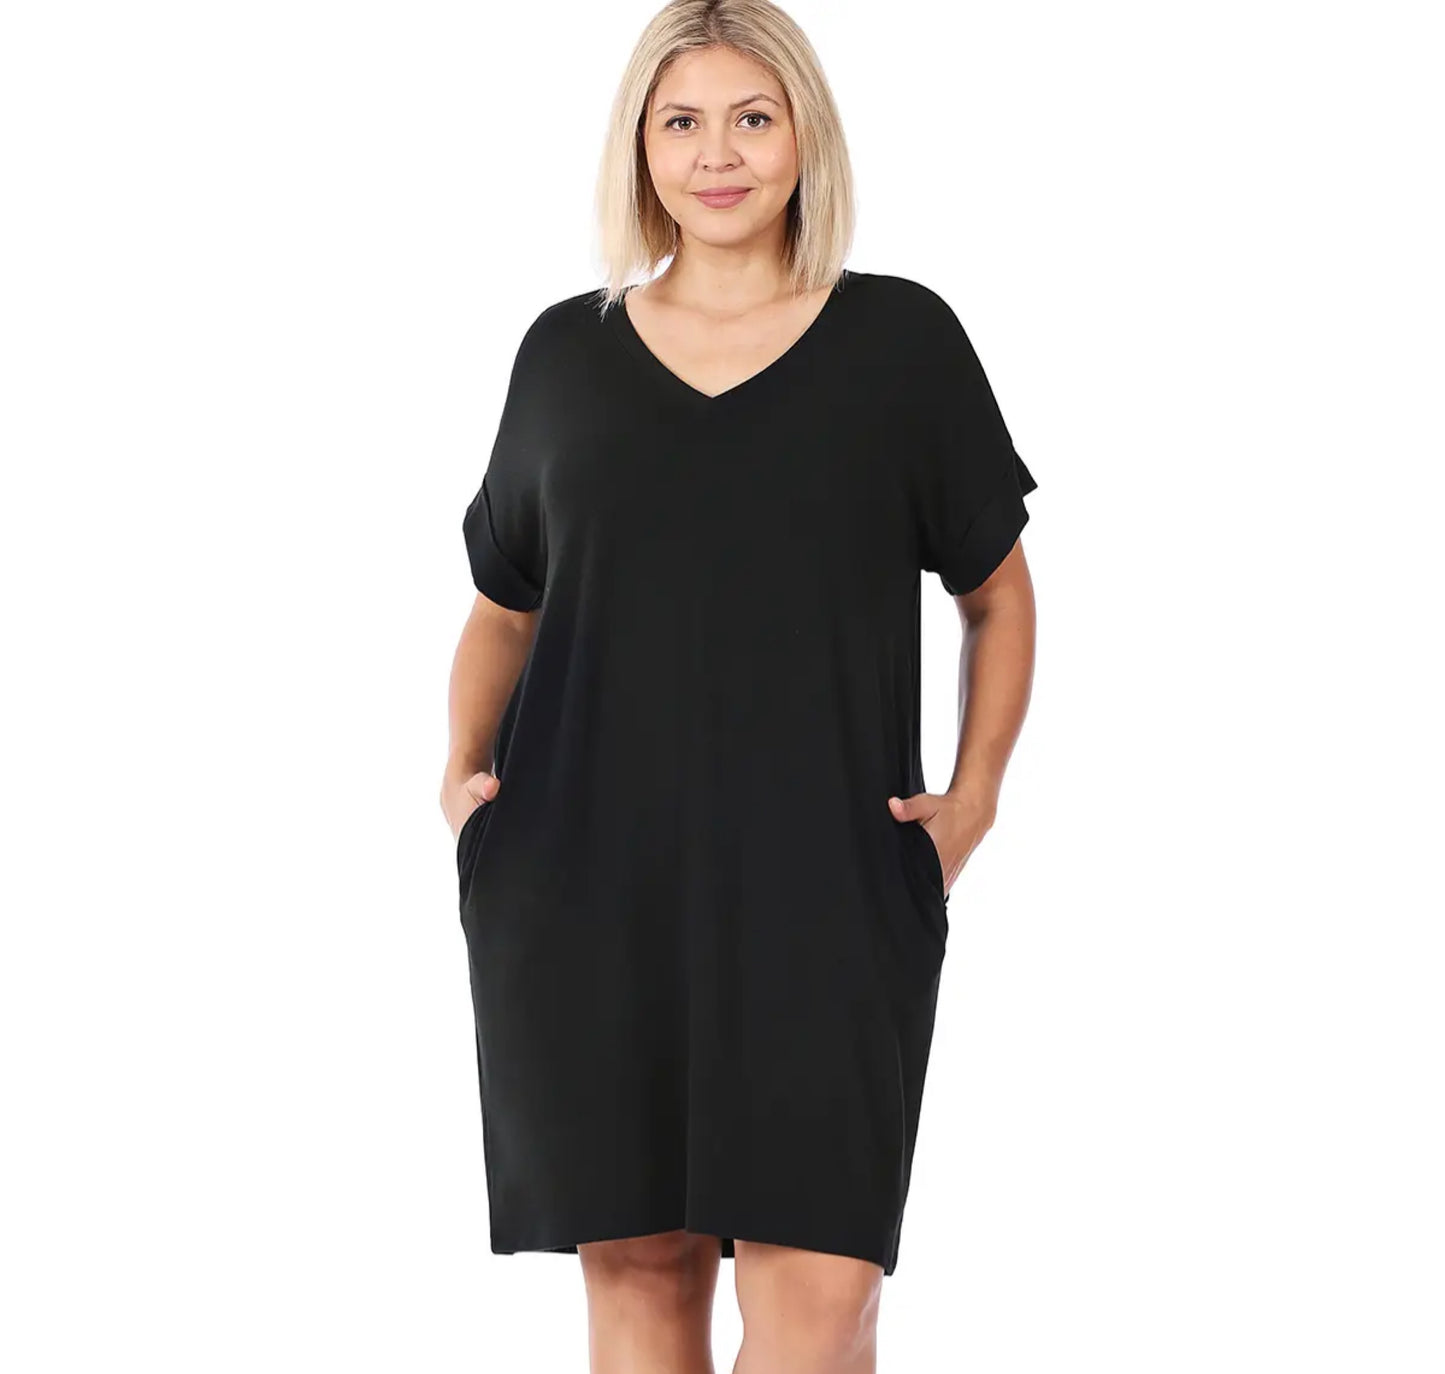 Misses and Plus Sized Pocketed Ready to Wear Dress